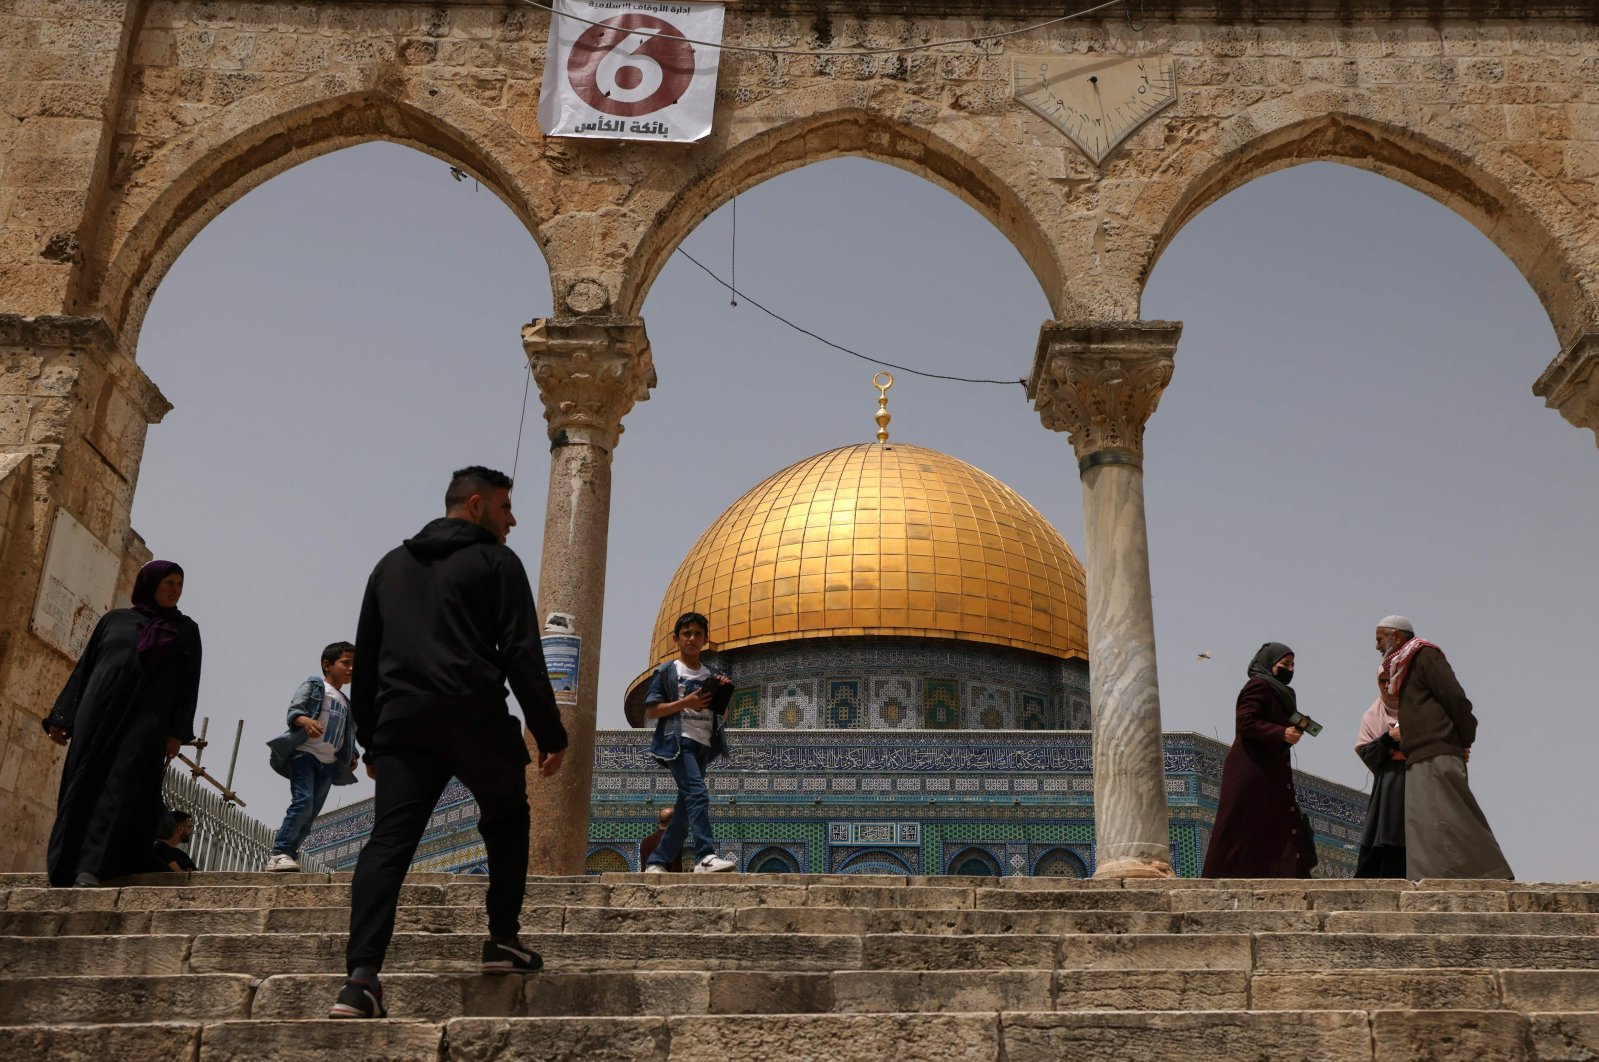 Palestinian Muslims gather in front of the Dome of Rock at the Al-Aqsa Mosque compound in the Old City, East Jerusalem, occupied Palestine, April 17, 2022. (AFP Photo)